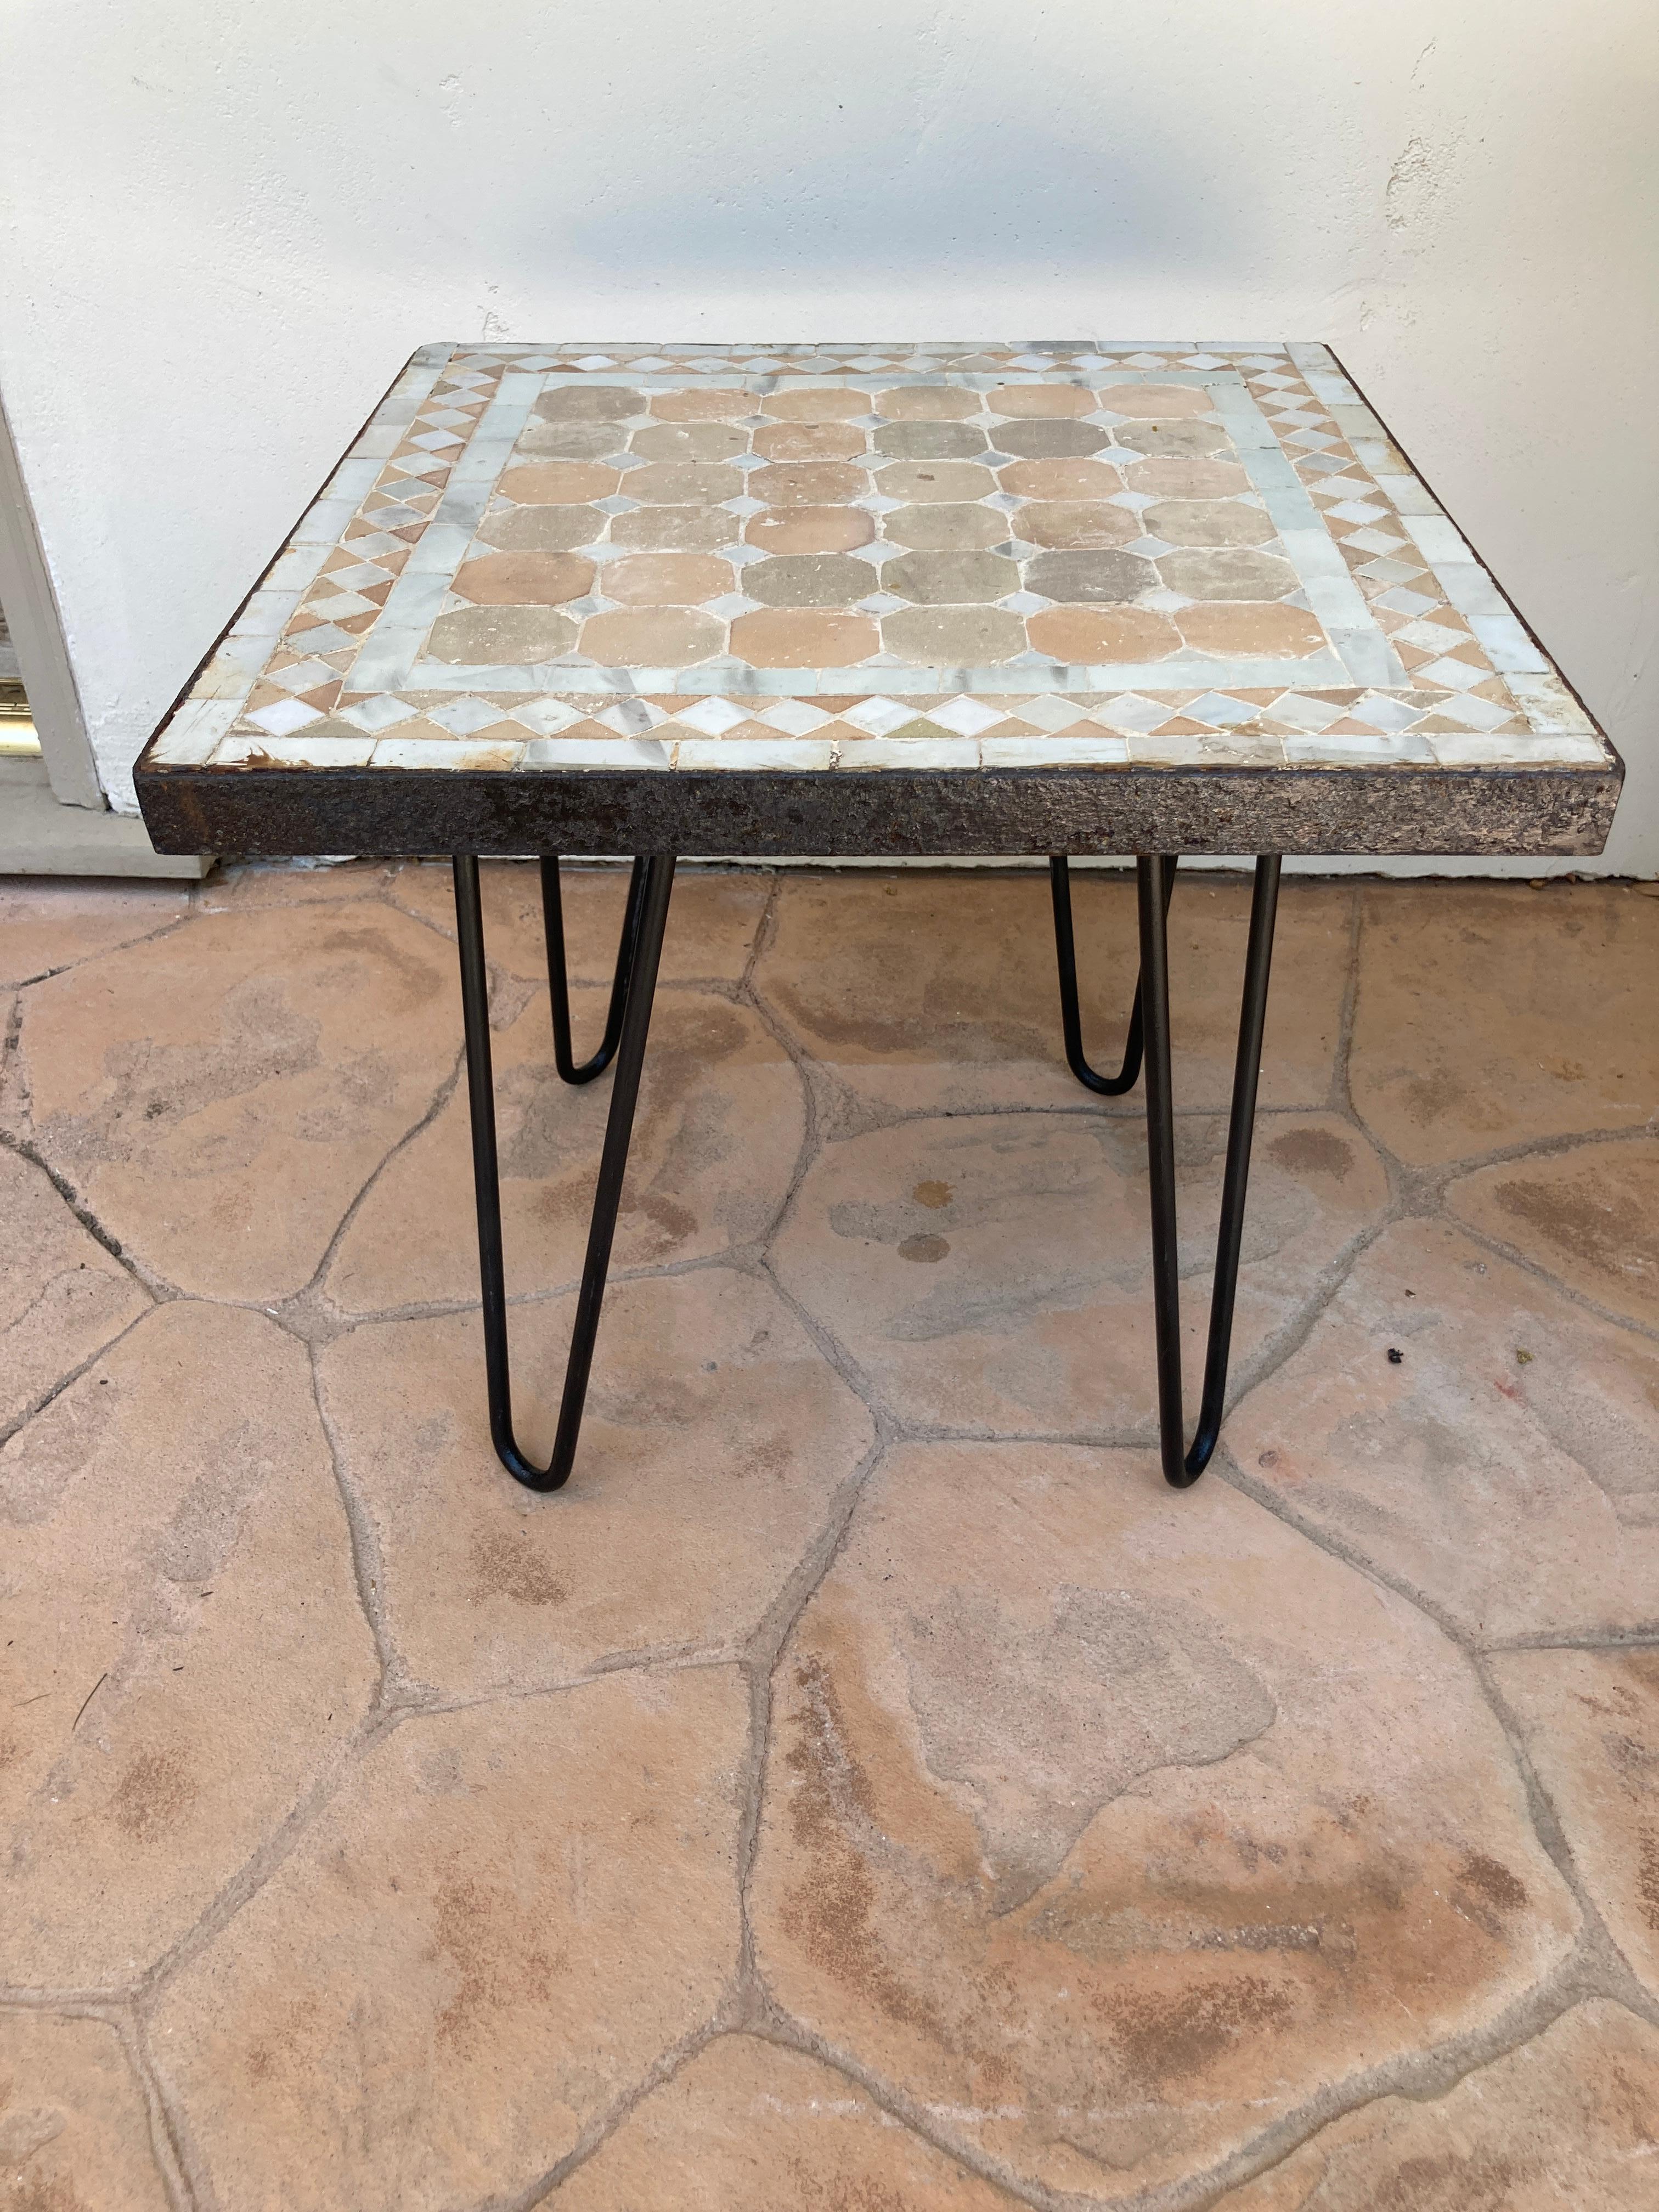 20th Century Moroccan Mosaic Tile Square Tile Side Table